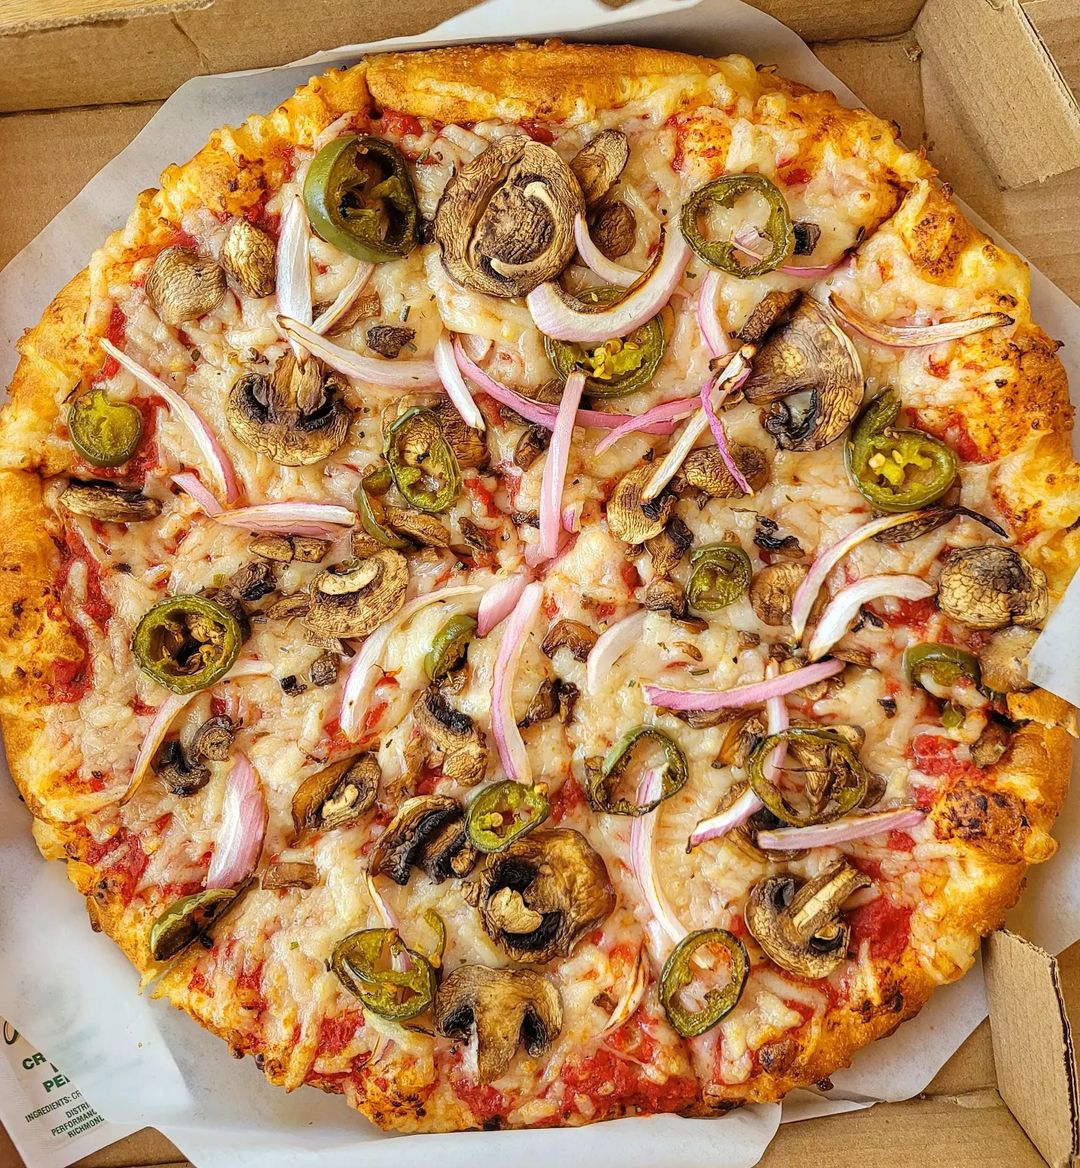 Pizza with vegan cheese, red onions, jalapeños and mushrooms from Fresco (Photo by Xochitl Gracia)